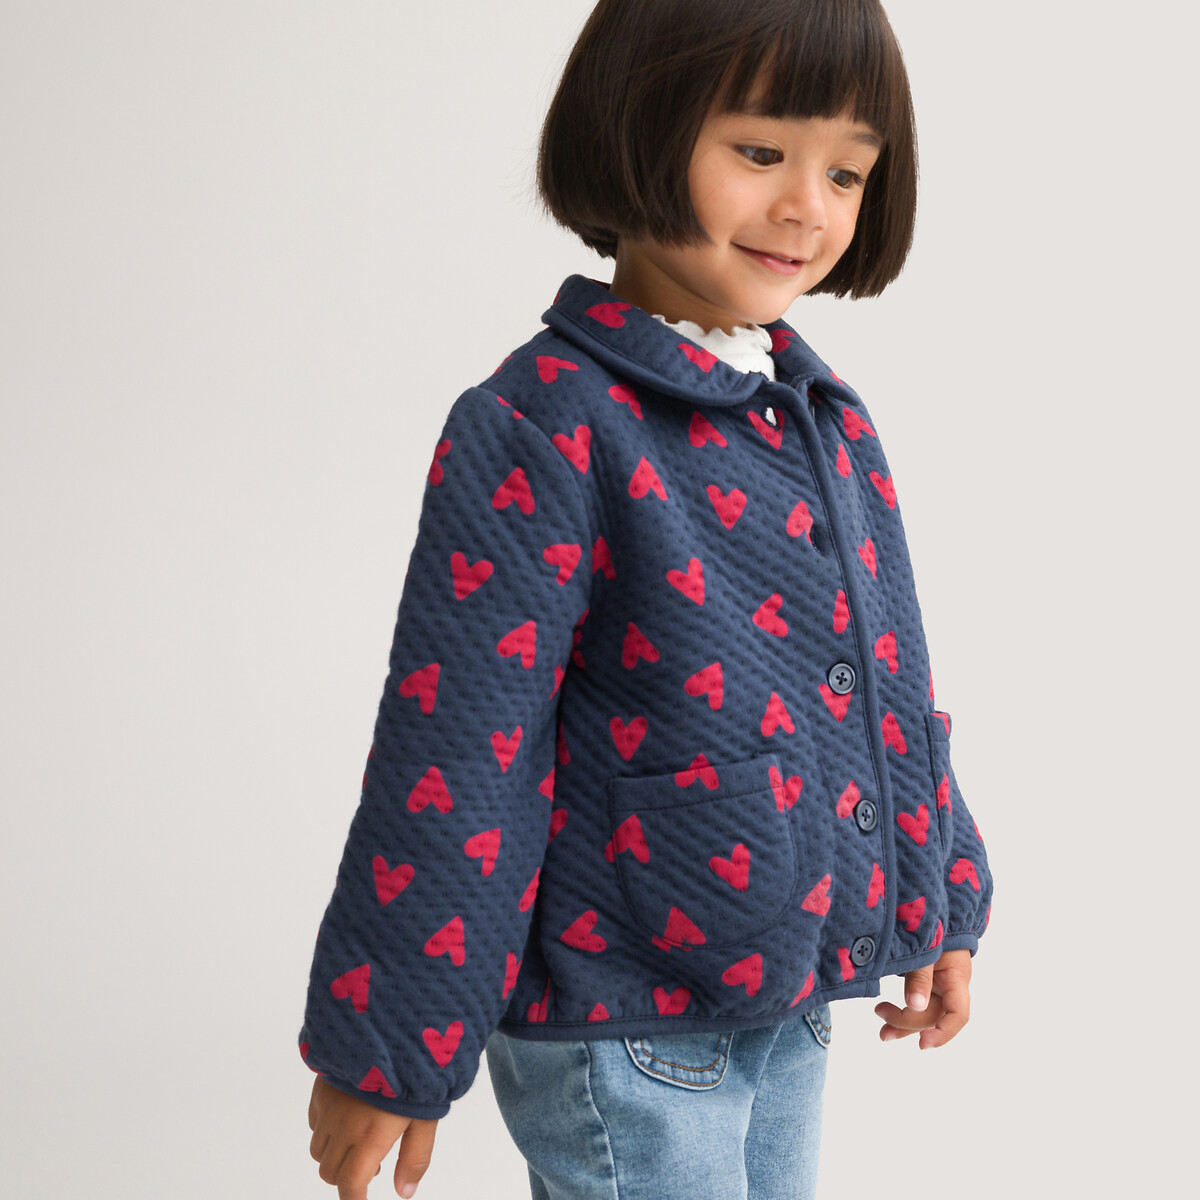 Heart Print Buttoned Sweatshirt in Cotton Mix with Peter Pan Collar